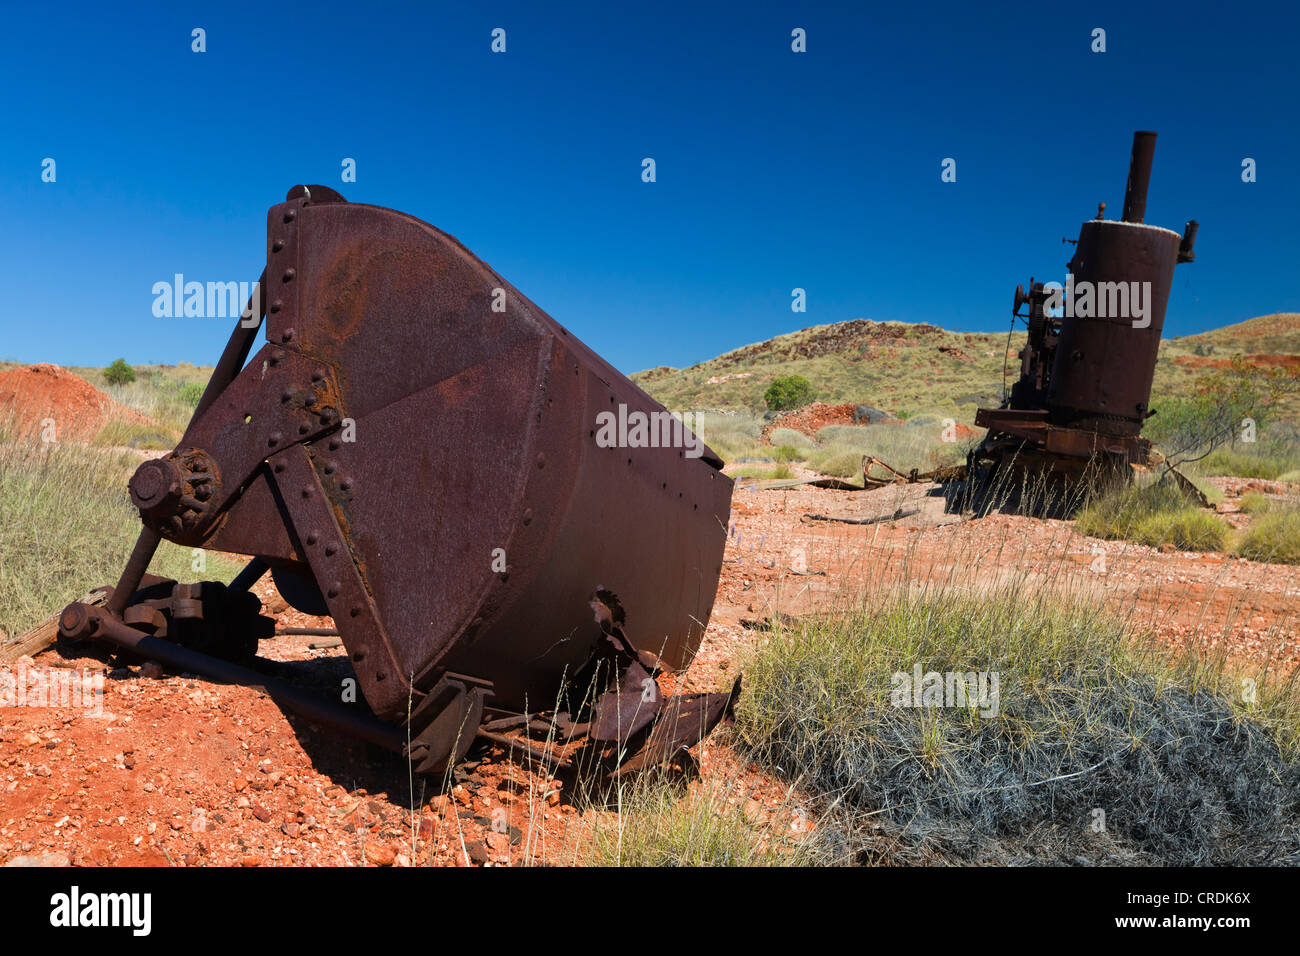 Rusty equipment from a long abandoned gold mine in Western Australia's outback, Marble Bar, Western Australia, Australia Stock Photo